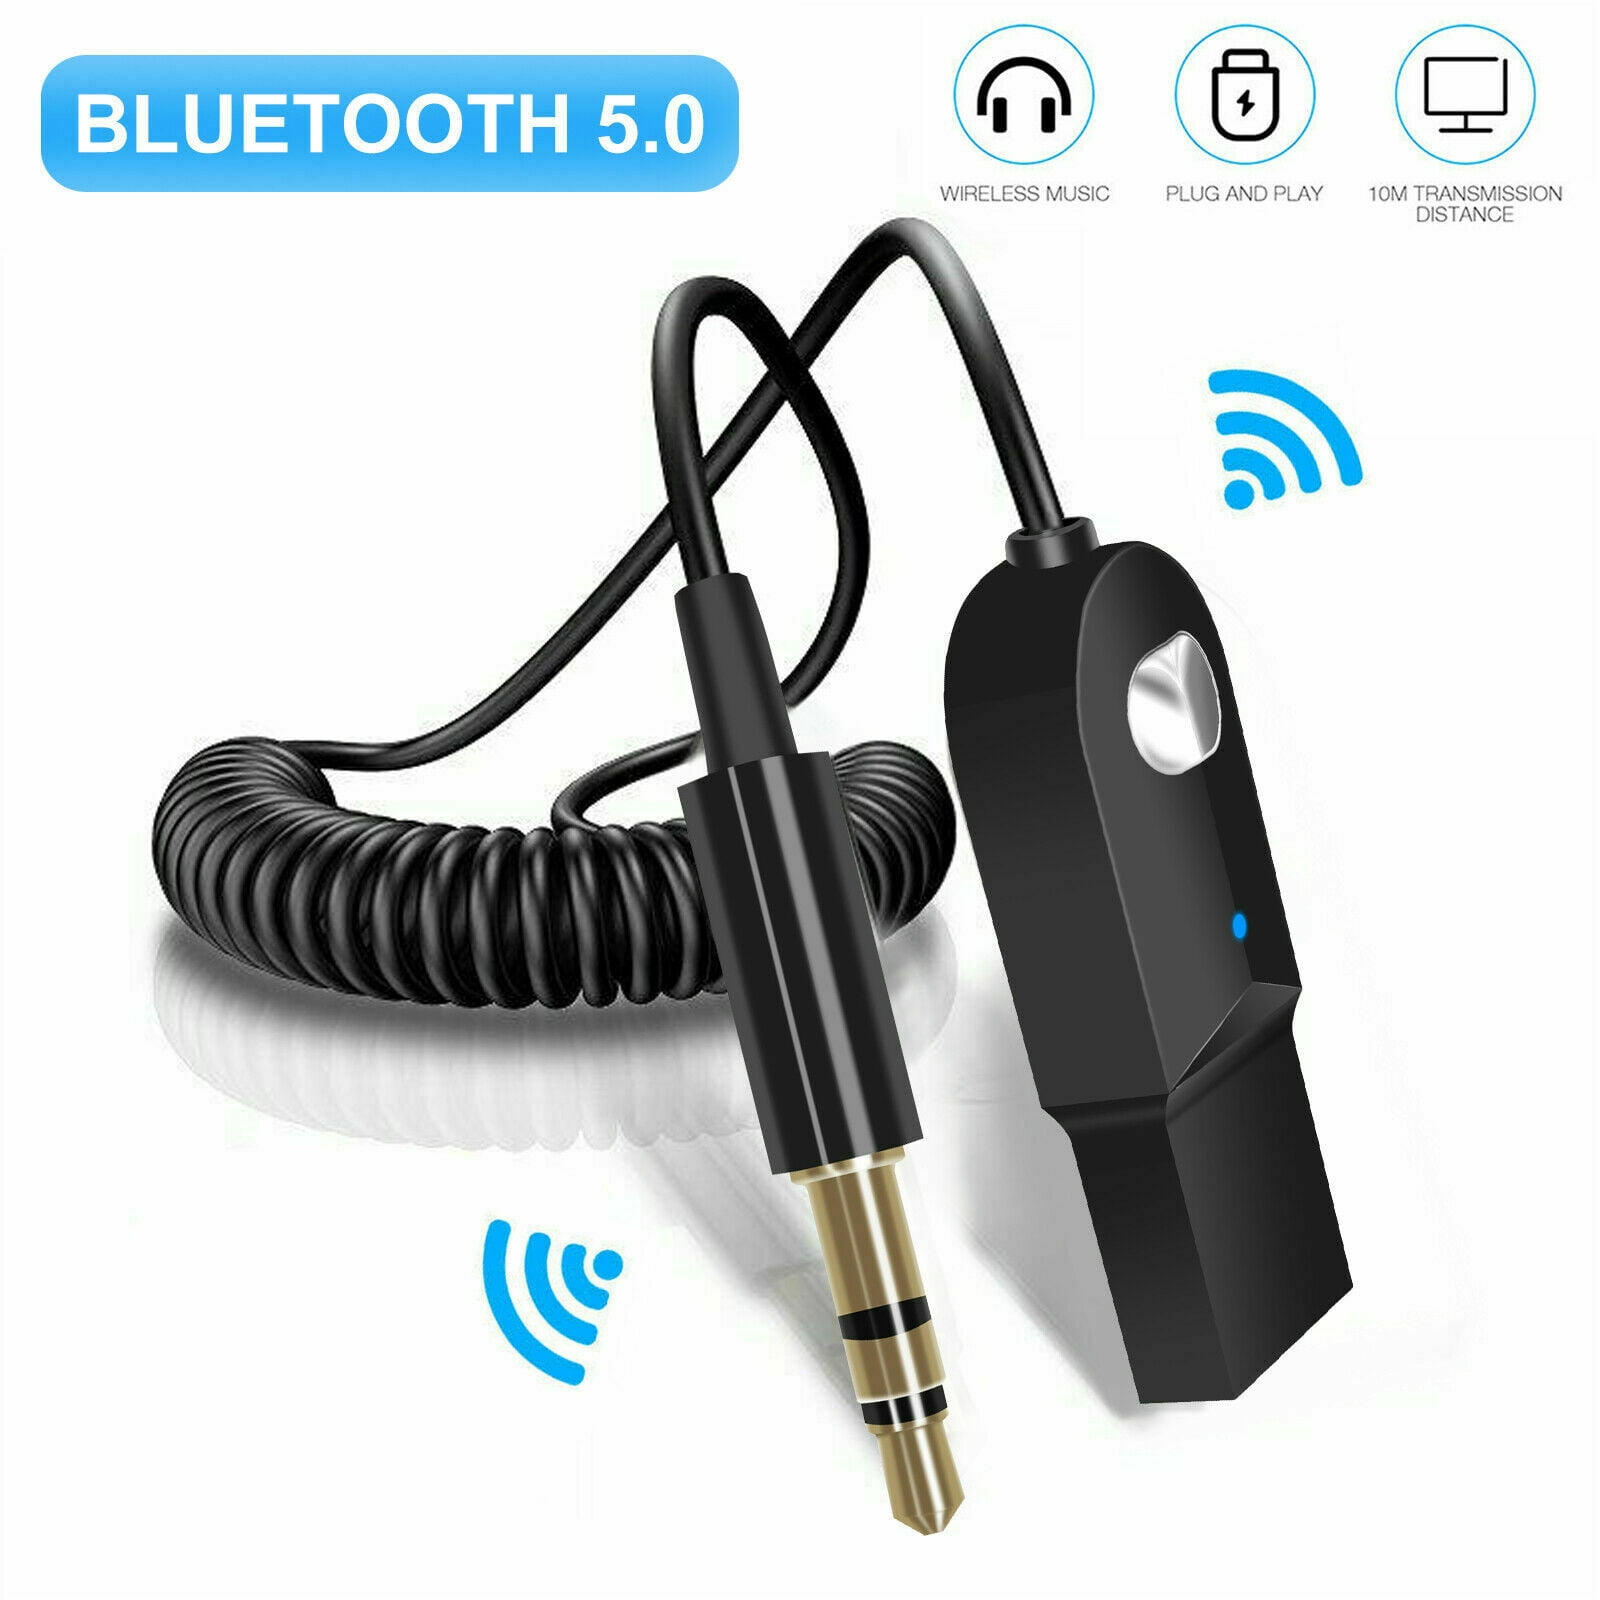 APP Control with Remote Control 3.5mm RCA Wireless Audio Adapter U Disk/TF Play Audio Cable Built‑in Fast Charging US Plug Bluetooth 5.0 Transmitter Receiver,Desong 2 in 1 Bluetooth Adapter 